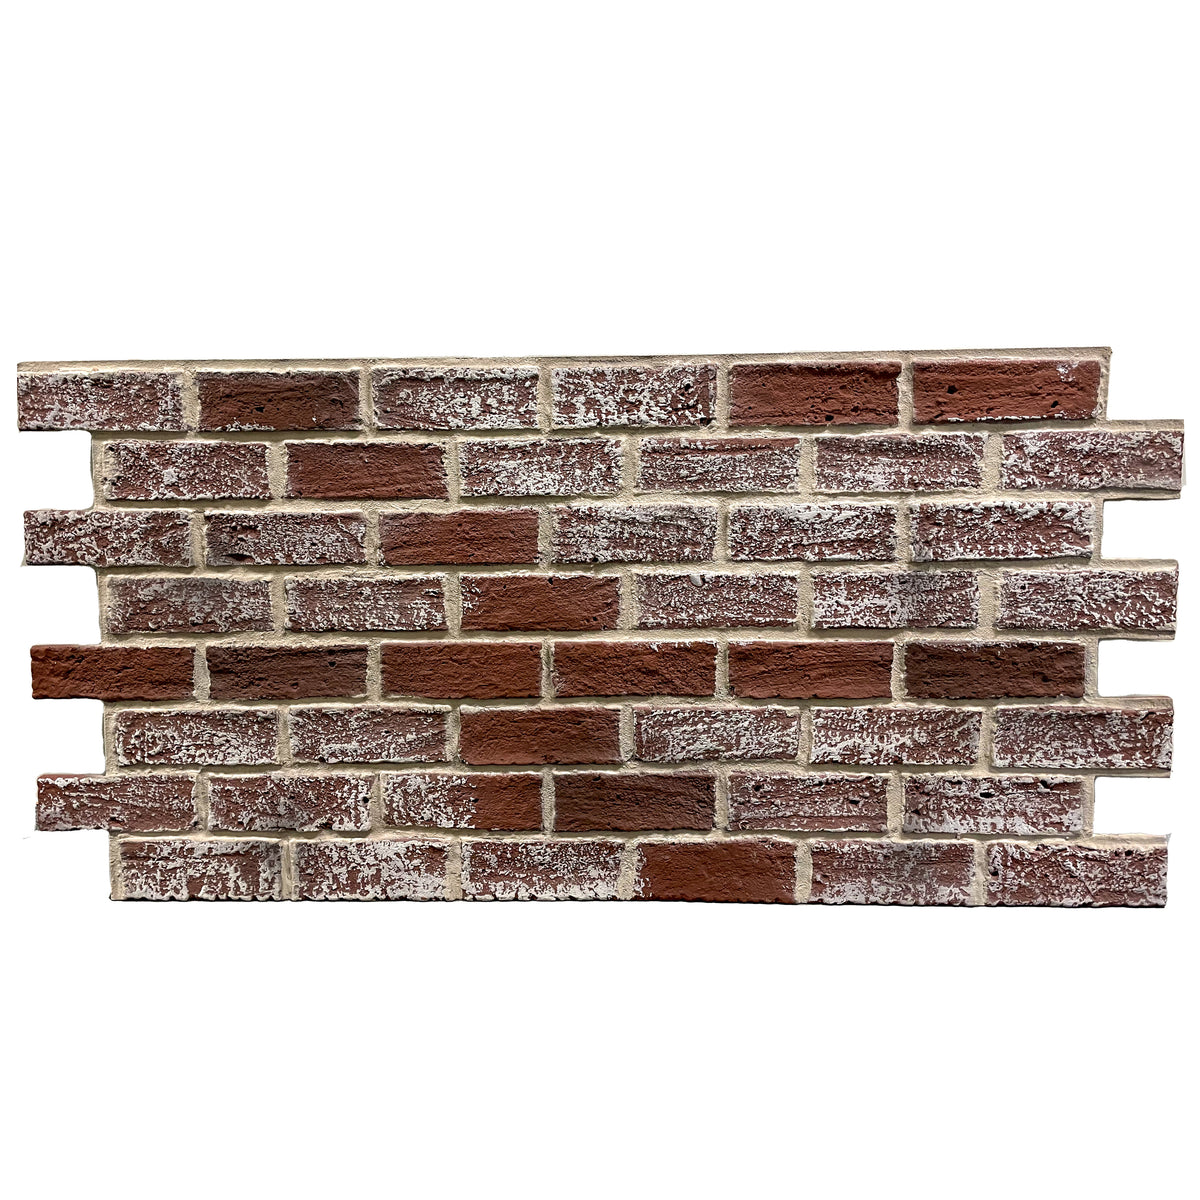 ClassicBrick 1/2" Faux Brick Panels - Reclaimed Red